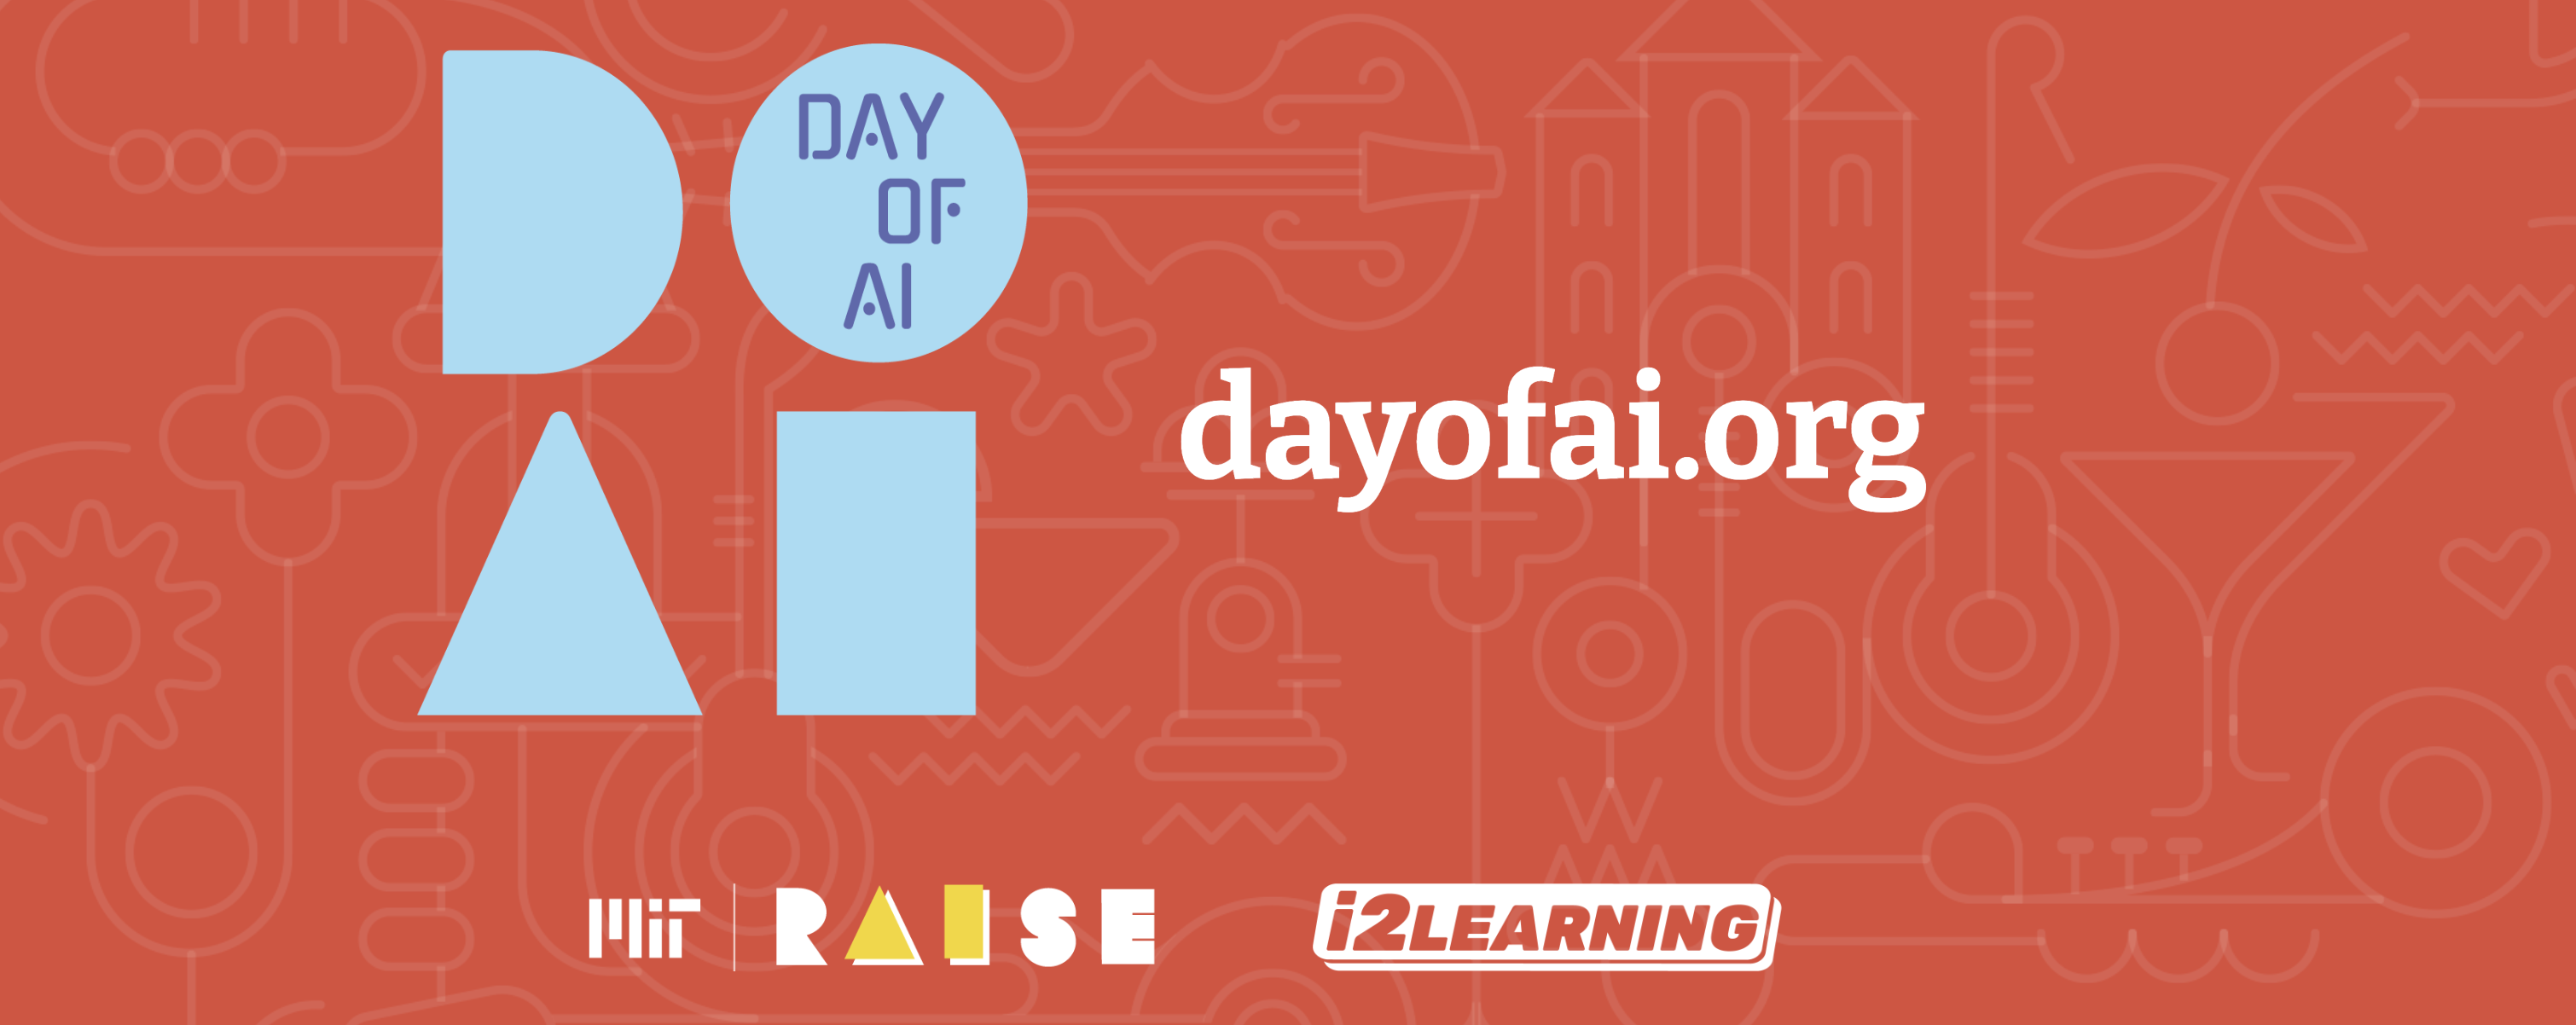 Day of AI